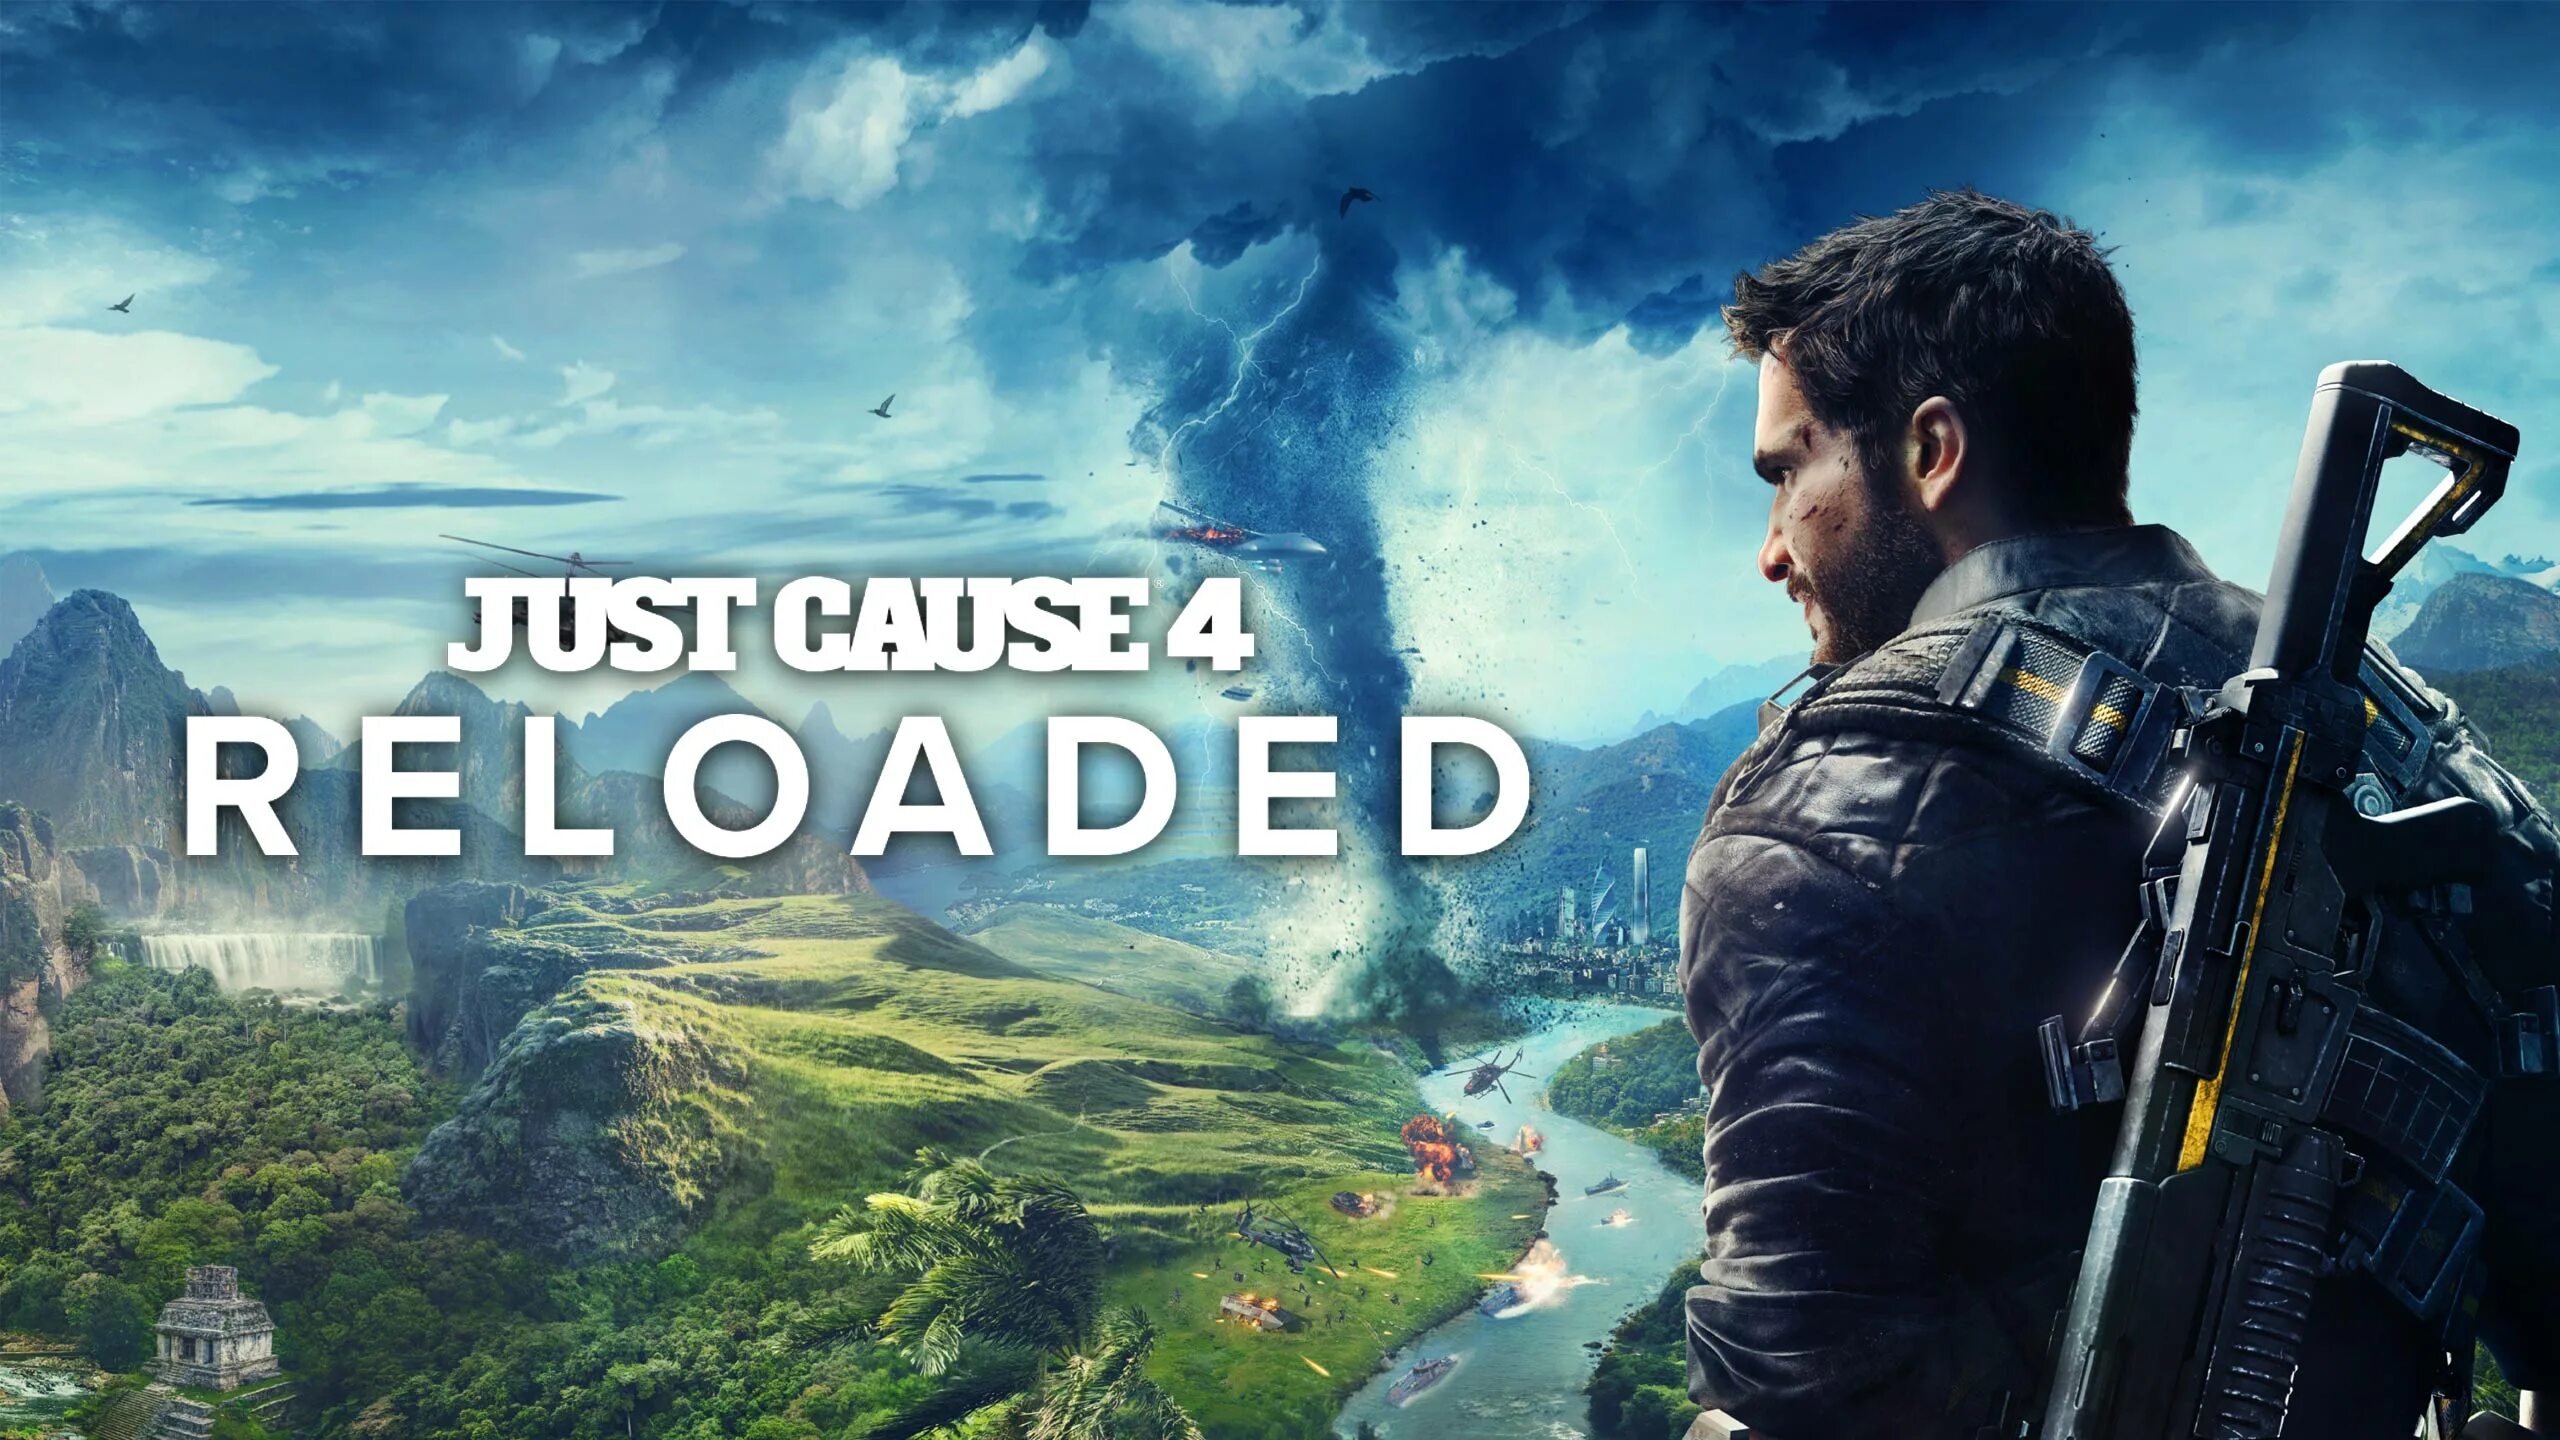 Just cause 4 русский. Just cause 4: новая обойма. Just cause 4 Standard Edition. Just cause 4 Reloaded. Just cause 4 стрим.